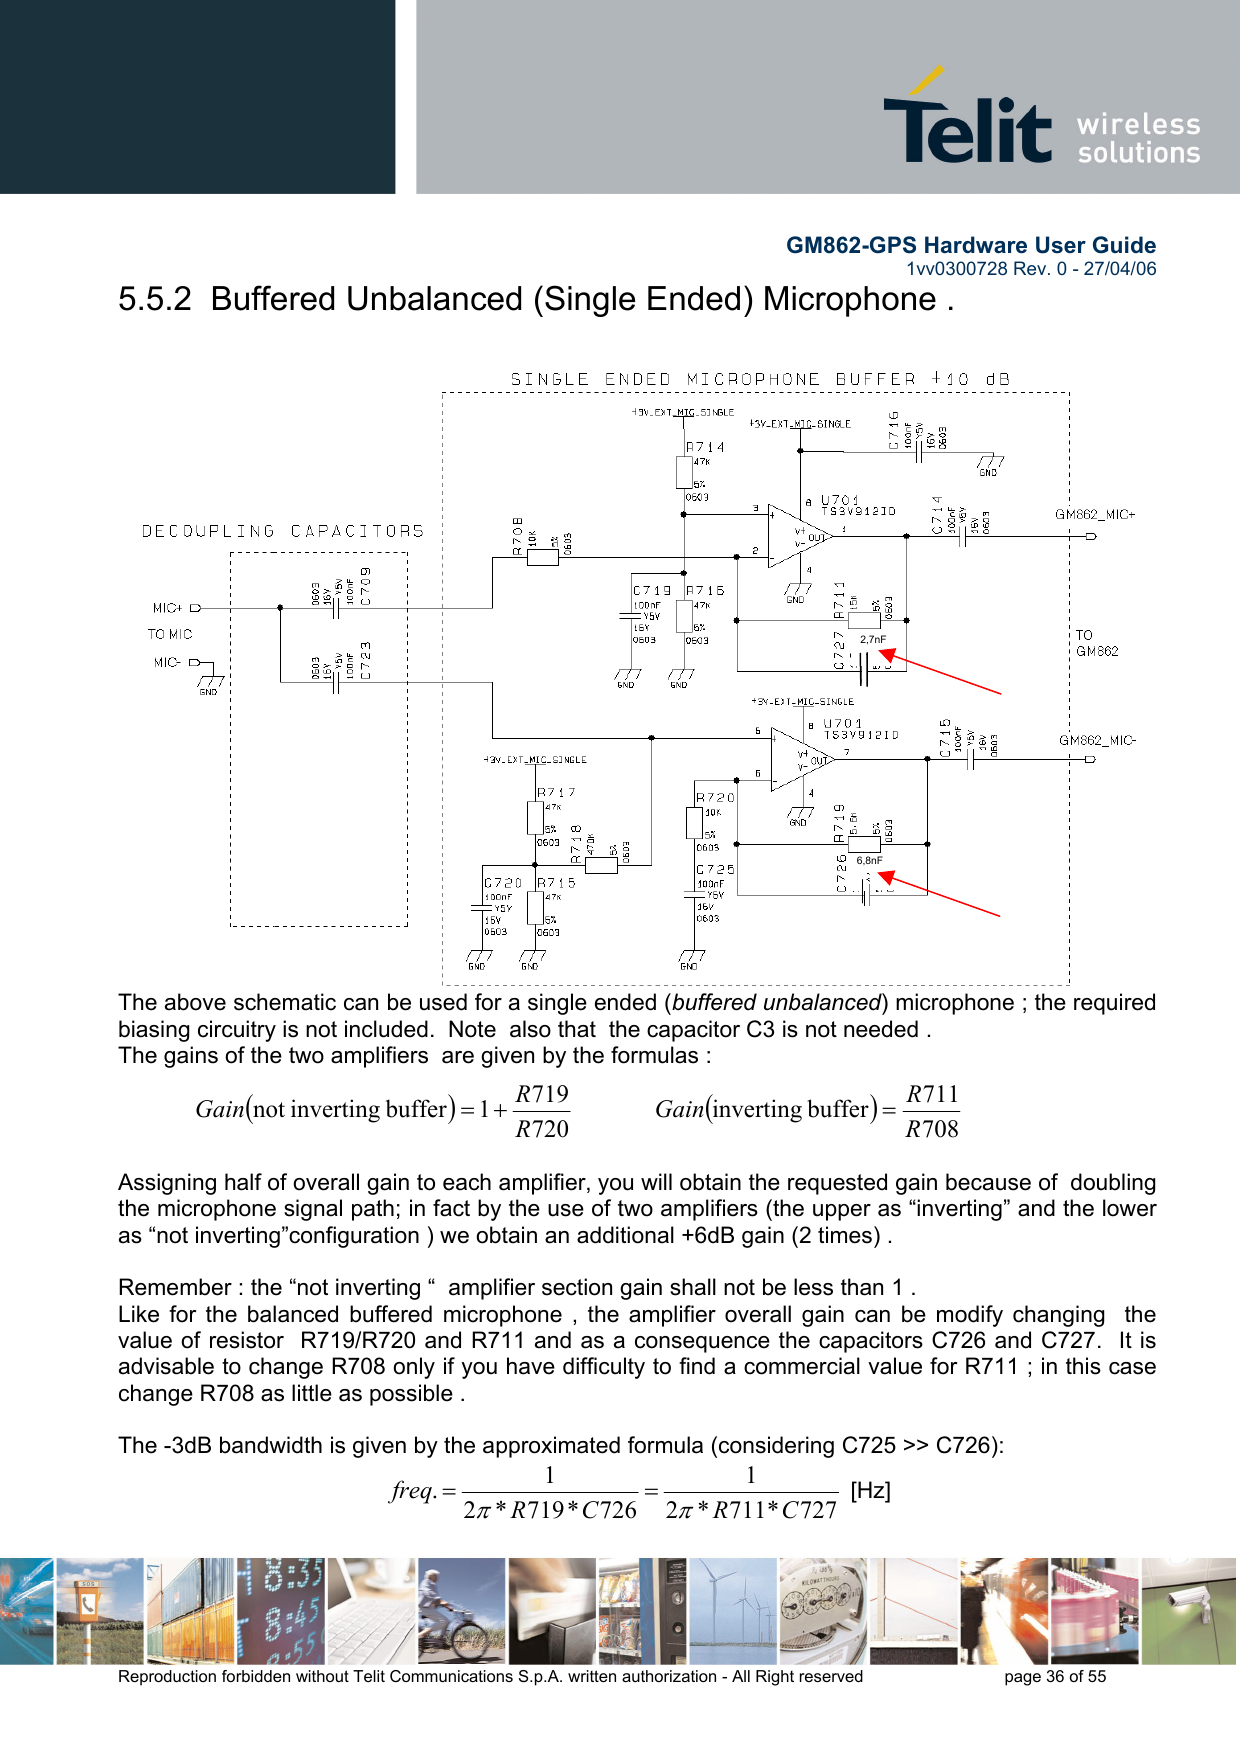        GM862-GPS Hardware User Guide   1vv0300728 Rev. 0 - 27/04/06    Reproduction forbidden without Telit Communications S.p.A. written authorization - All Right reserved    page 36 of 55  5.5.2  Buffered Unbalanced (Single Ended) Microphone .   The above schematic can be used for a single ended (buffered unbalanced) microphone ; the required biasing circuitry is not included.  Note  also that  the capacitor C3 is not needed . The gains of the two amplifiers  are given by the formulas :  ()7207191buffer invertingnot  RRGain +=             ()708711buffer inverting RRGain =   Assigning half of overall gain to each amplifier, you will obtain the requested gain because of  doubling the microphone signal path; in fact by the use of two amplifiers (the upper as “inverting” and the lower as “not inverting”configuration ) we obtain an additional +6dB gain (2 times) .  Remember : the “not inverting “  amplifier section gain shall not be less than 1 .   Like for the balanced buffered microphone , the amplifier overall gain can be modify changing  the value of resistor  R719/R720 and R711 and as a consequence the capacitors C726 and C727.  It is advisable to change R708 only if you have difficulty to find a commercial value for R711 ; in this case change R708 as little as possible .    The -3dB bandwidth is given by the approximated formula (considering C725 &gt;&gt; C726): 727*711*21726*719*21.CRCRfreqππ==  [Hz] 2,7nF 6,8nF 